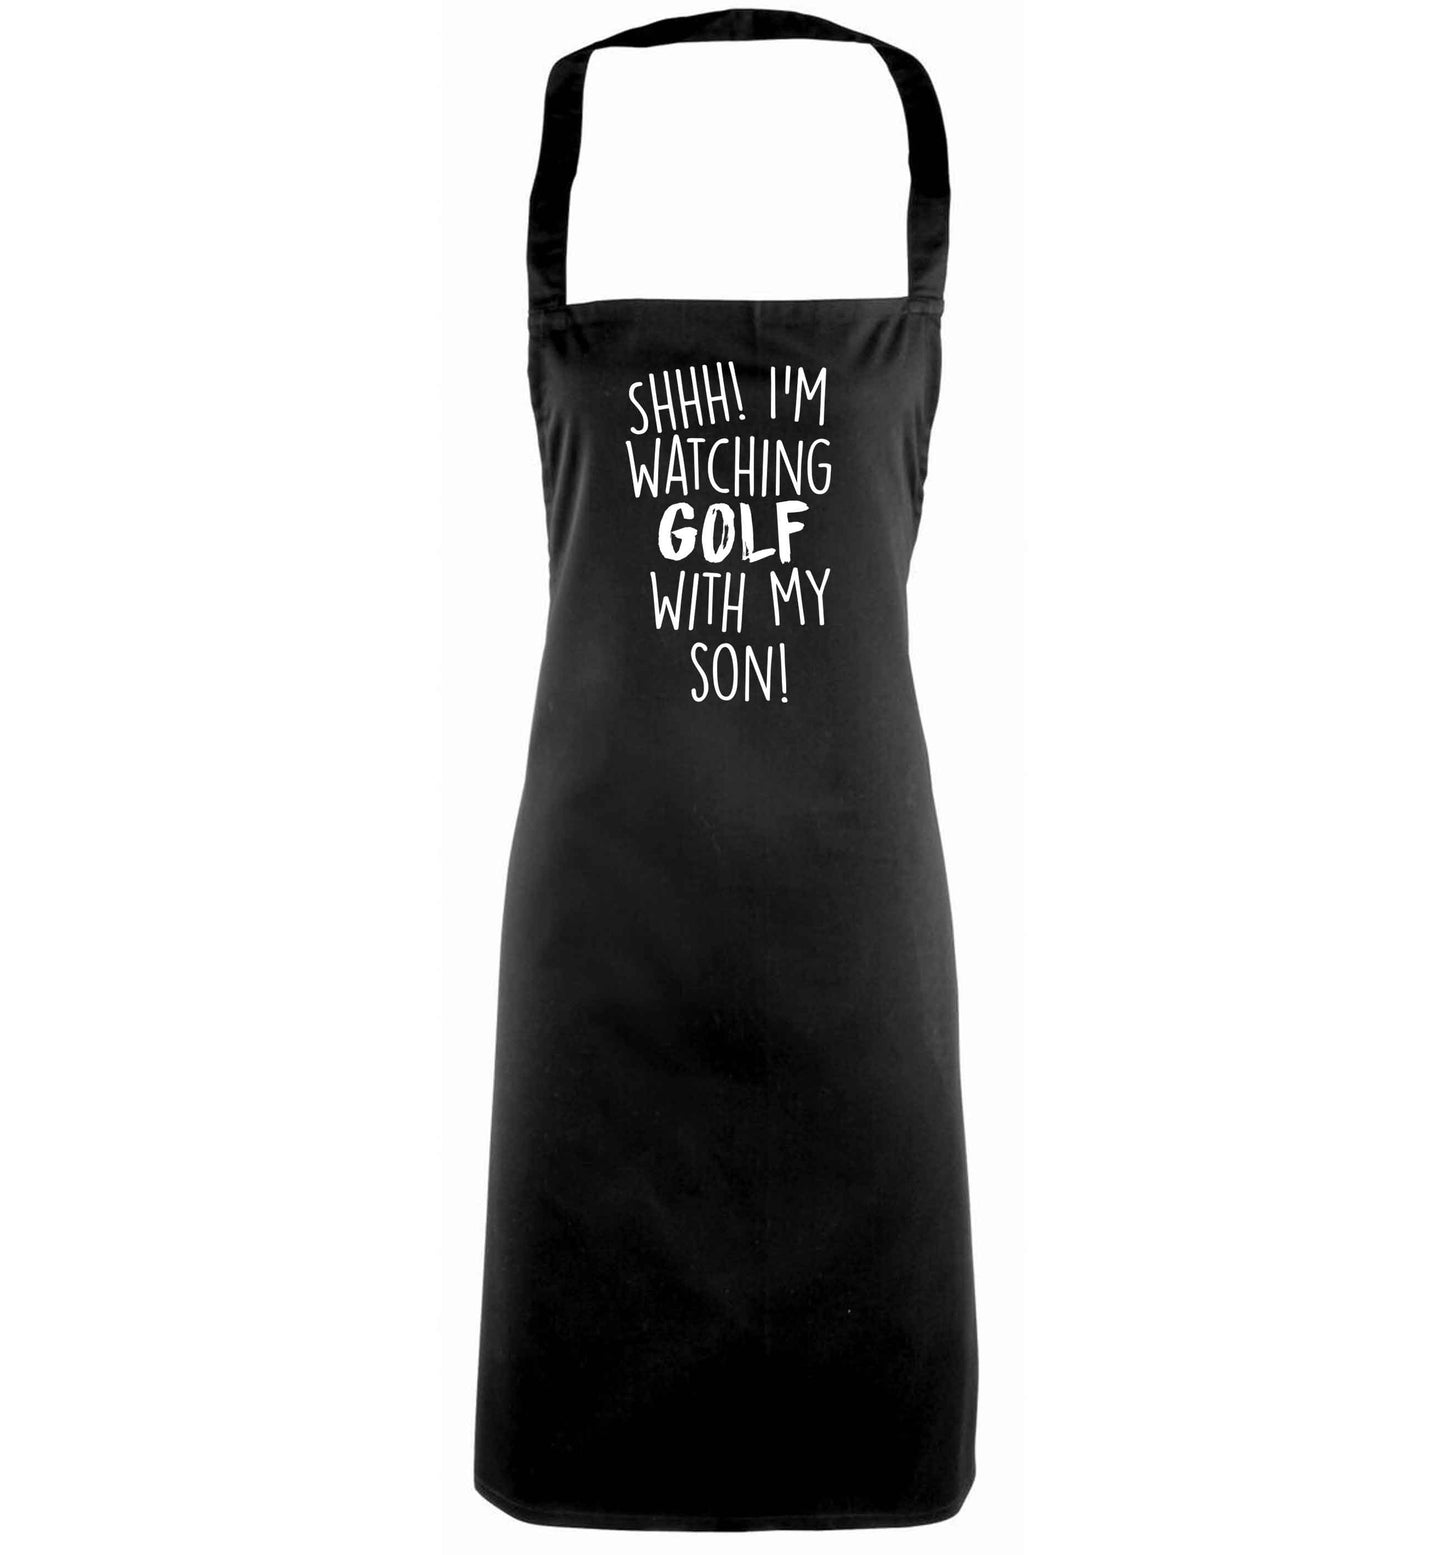 Shh I'm watching golf with my son black apron